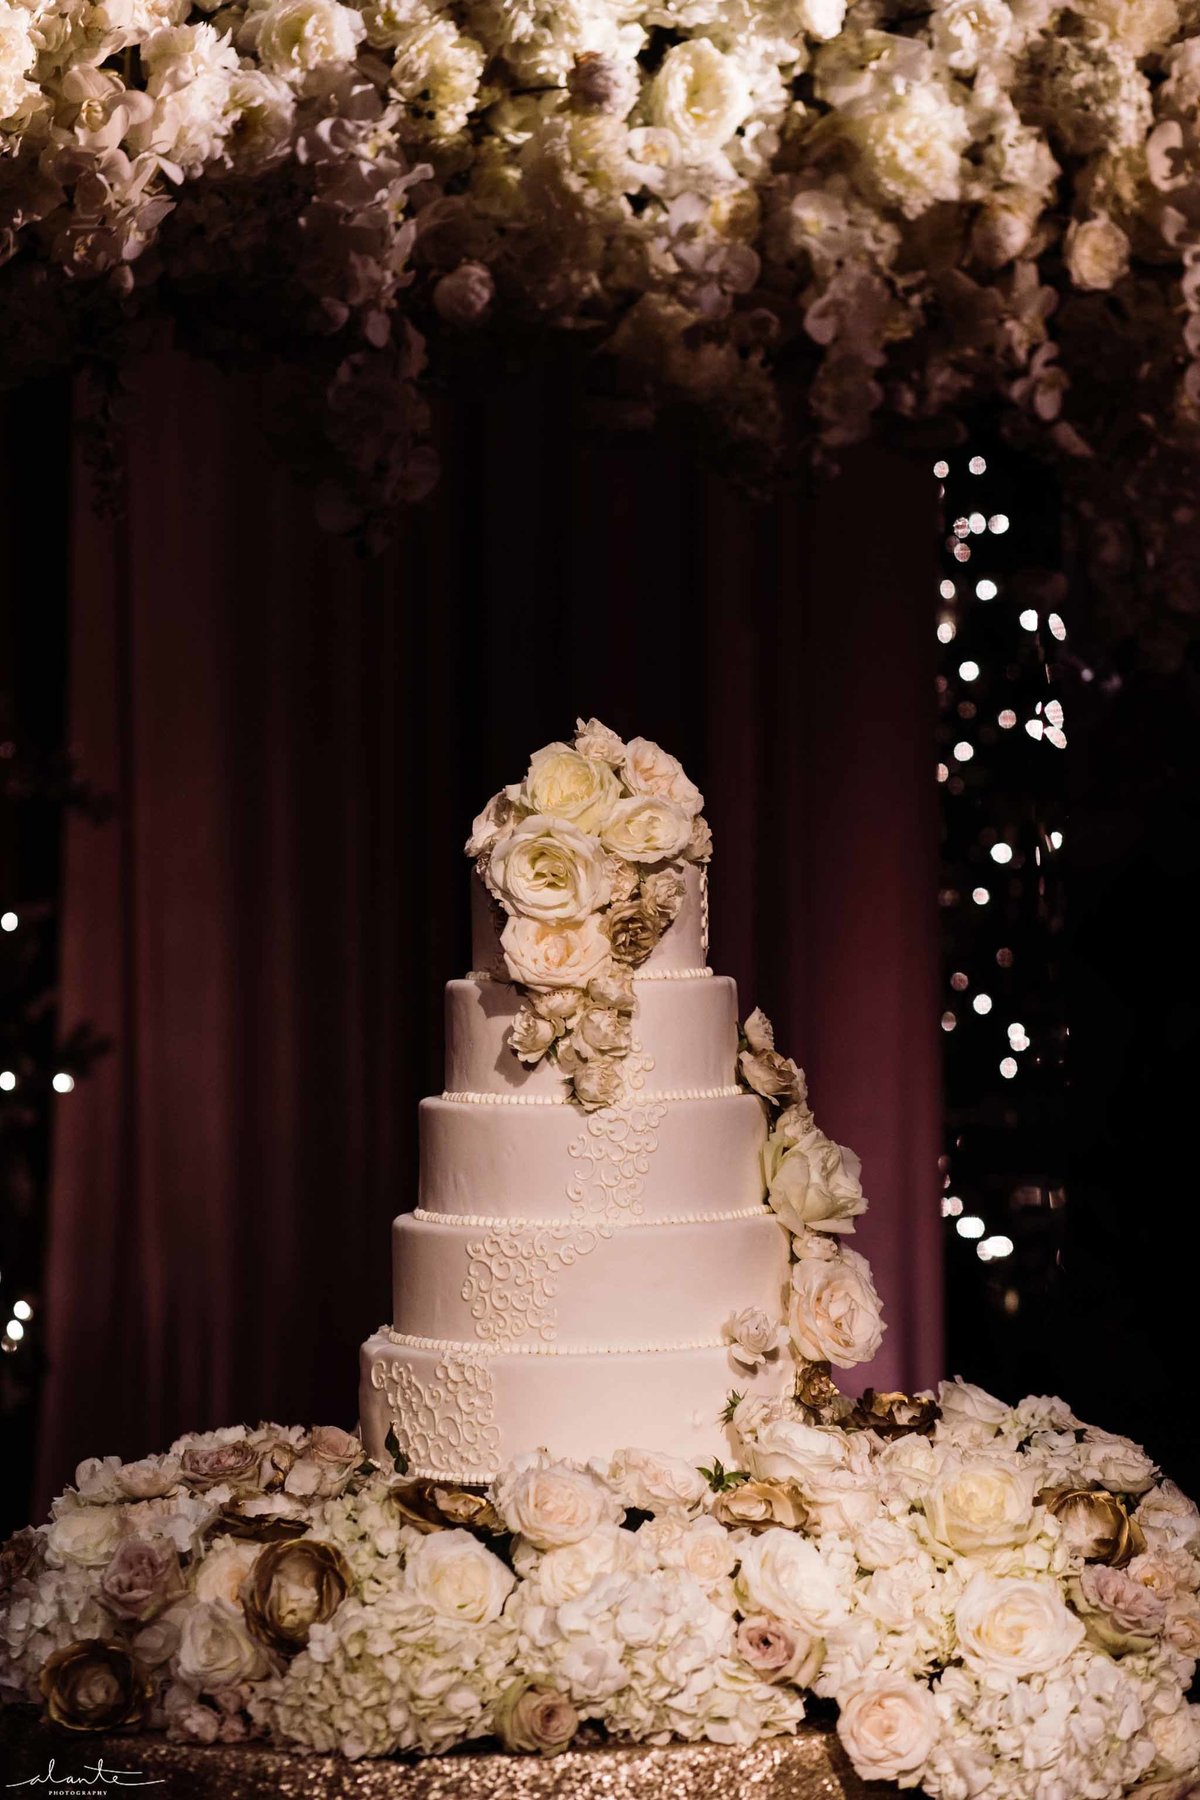 White tired wedding cake surrounded by white flowers.